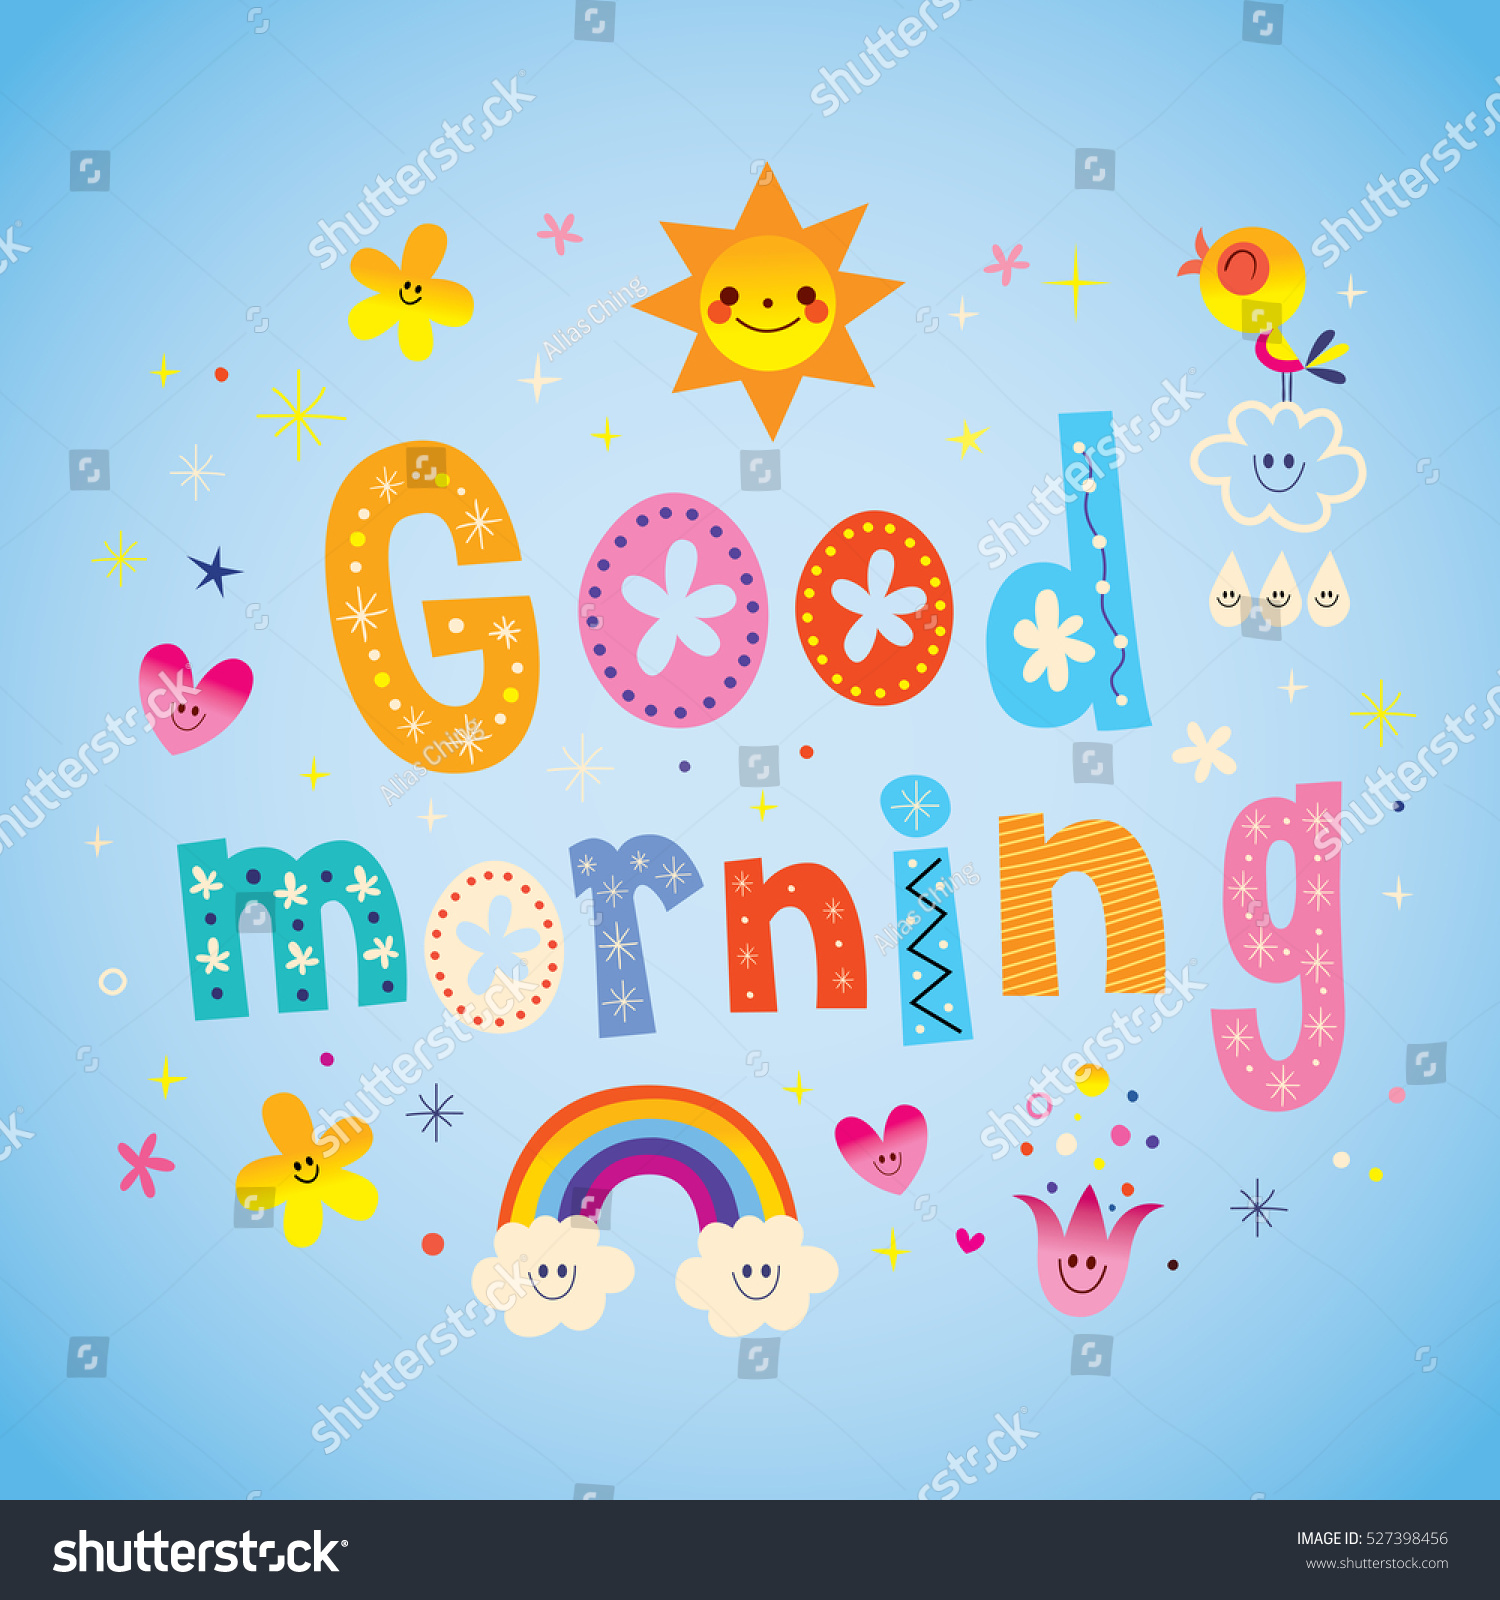 Good Morning Unique Lettering Design Cute Stock Vector (Royalty Free ...